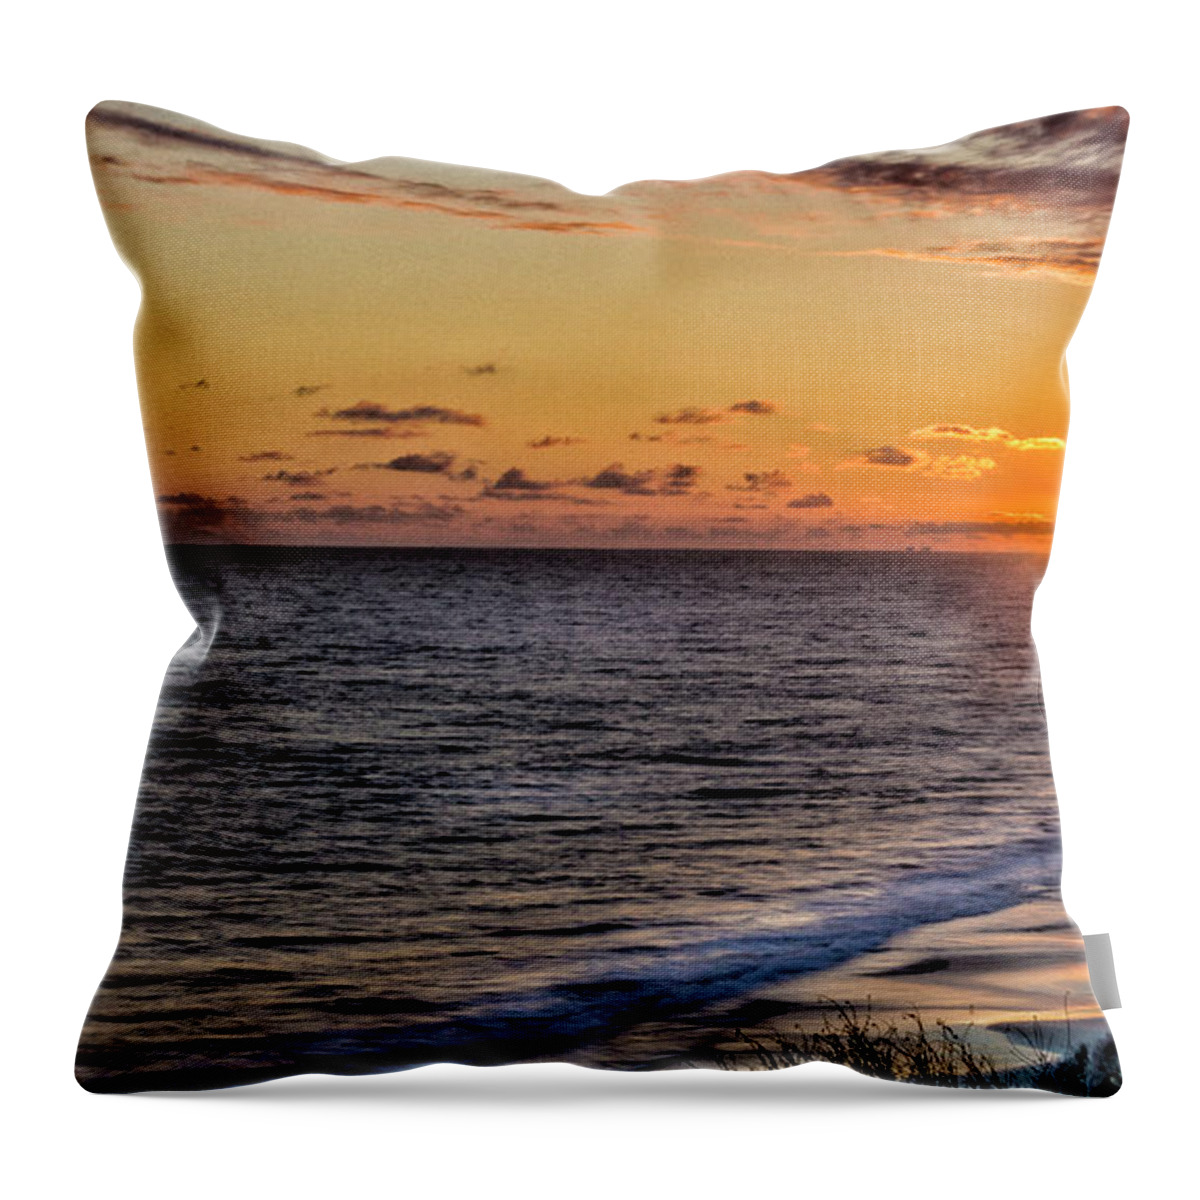 California Pacific Coastline Throw Pillow featuring the photograph Crystal Cove Sunset 1 #1 by Donald Pash